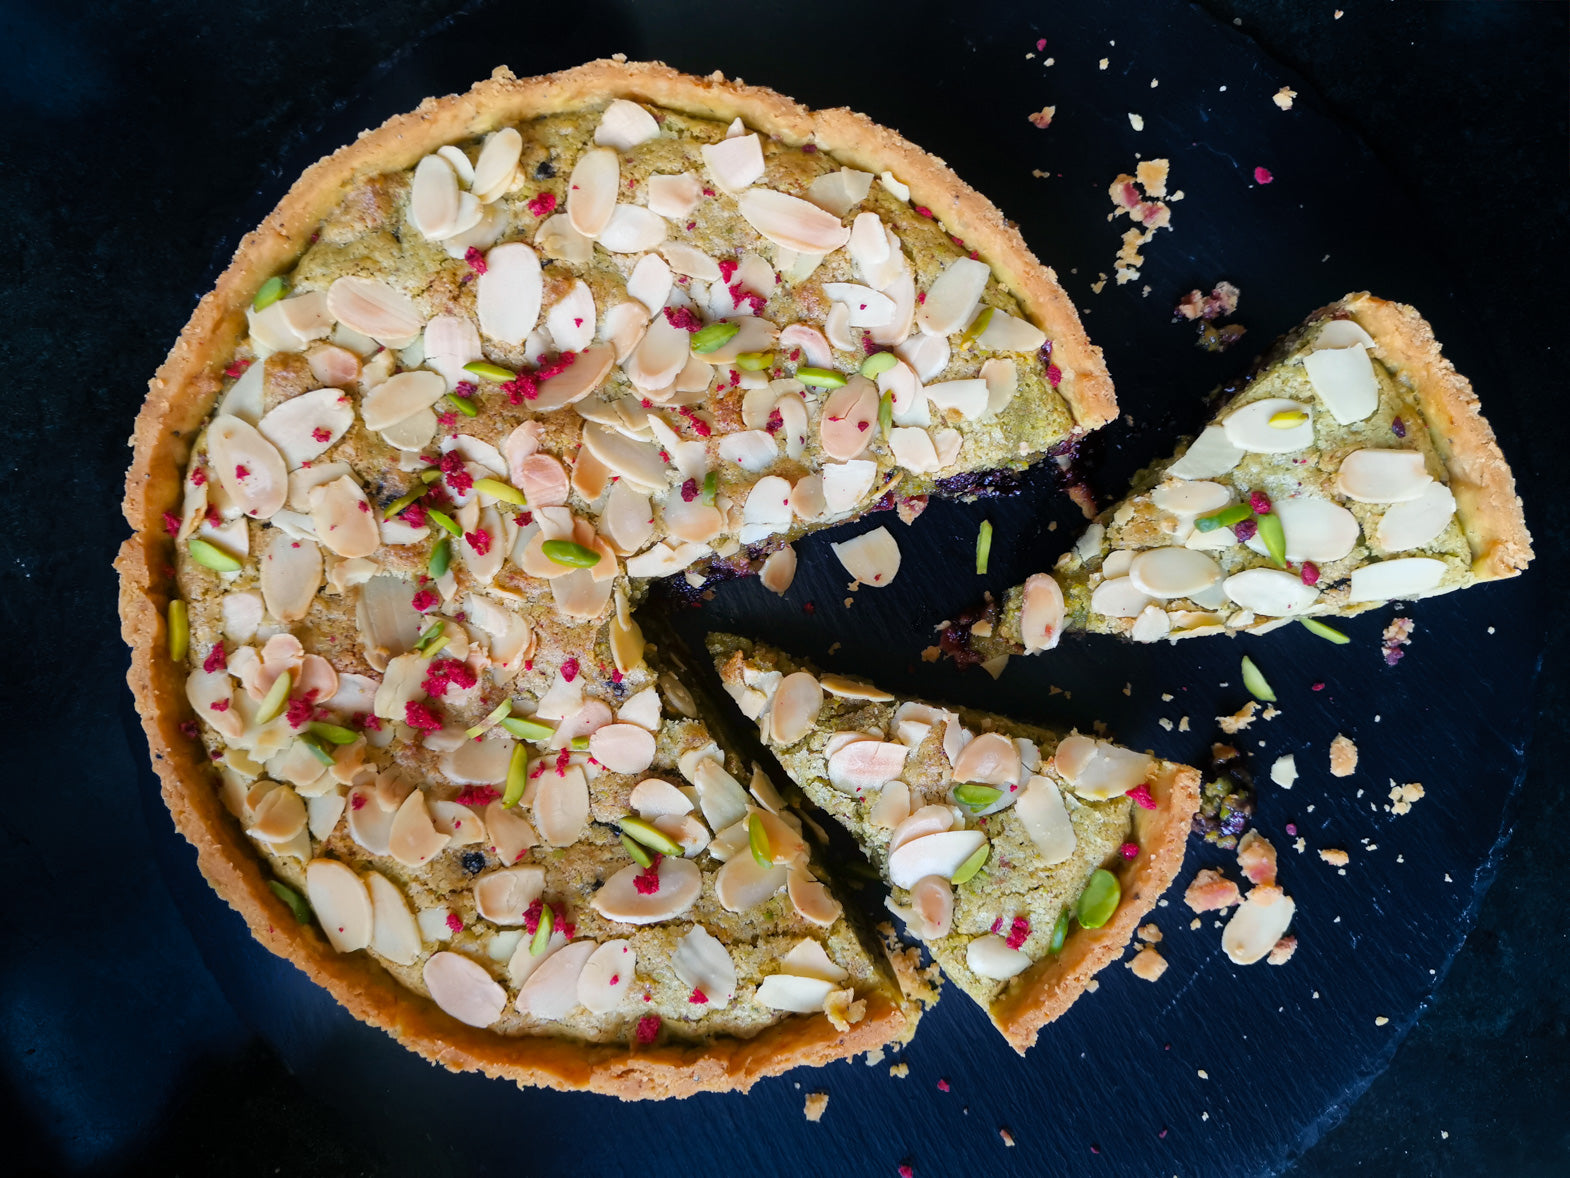 Sour Cherry And Pistachio Bakewell Tart With Cardamom Pastry Recipe